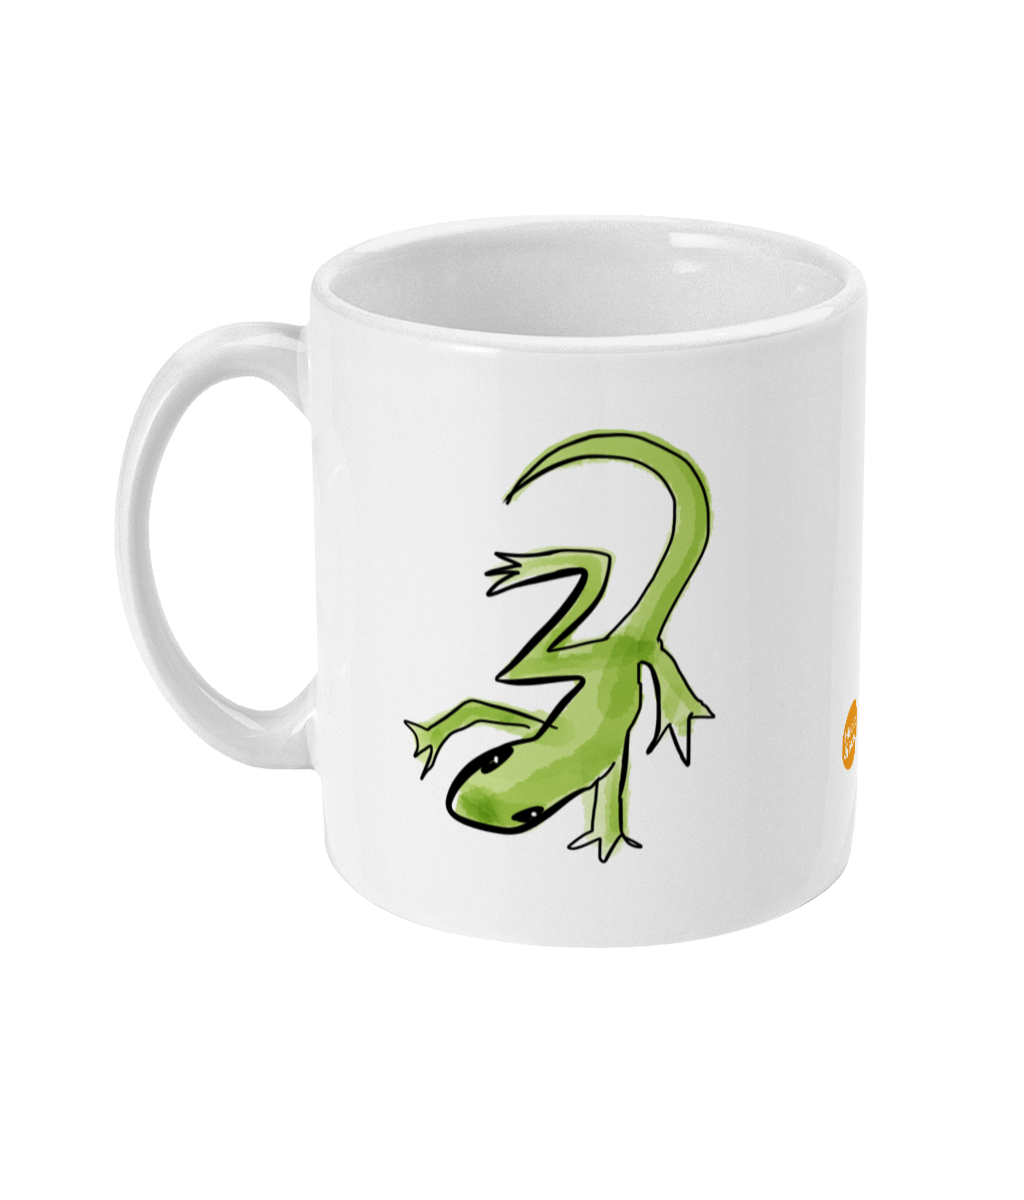 Lounge Lizard mug design by Hector and Bone Left View